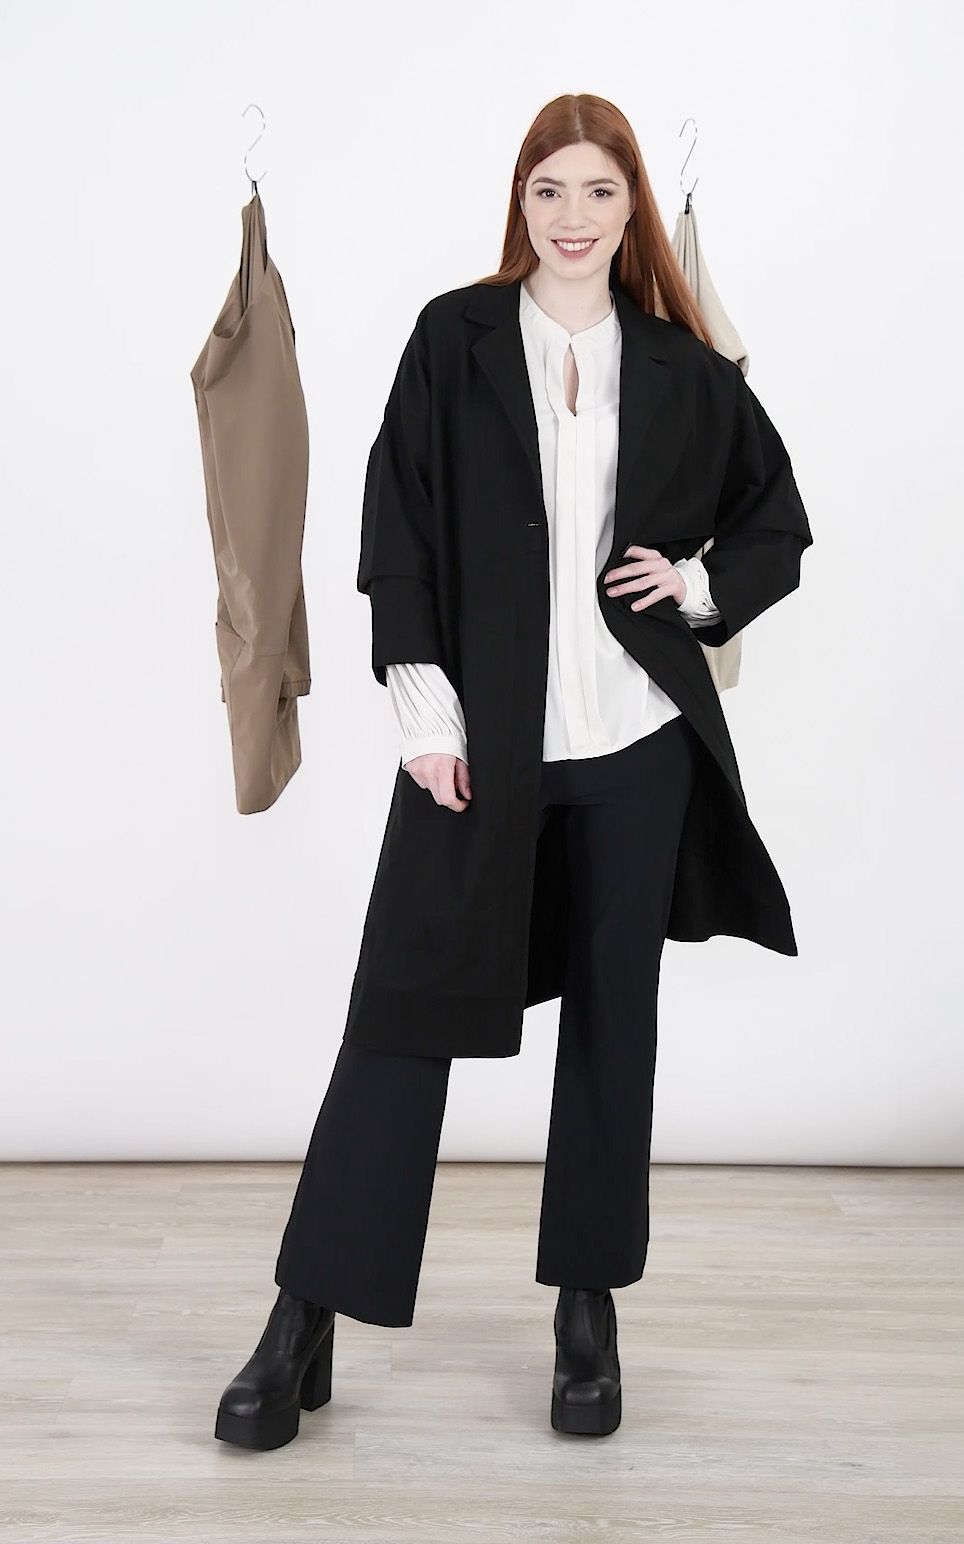 Pants, item no. 23528 Black Cappuccino Mocca – Blouse, item no. 23530 Black Cappuccino Mocca Milk White – Coat 23640 Black Taupe